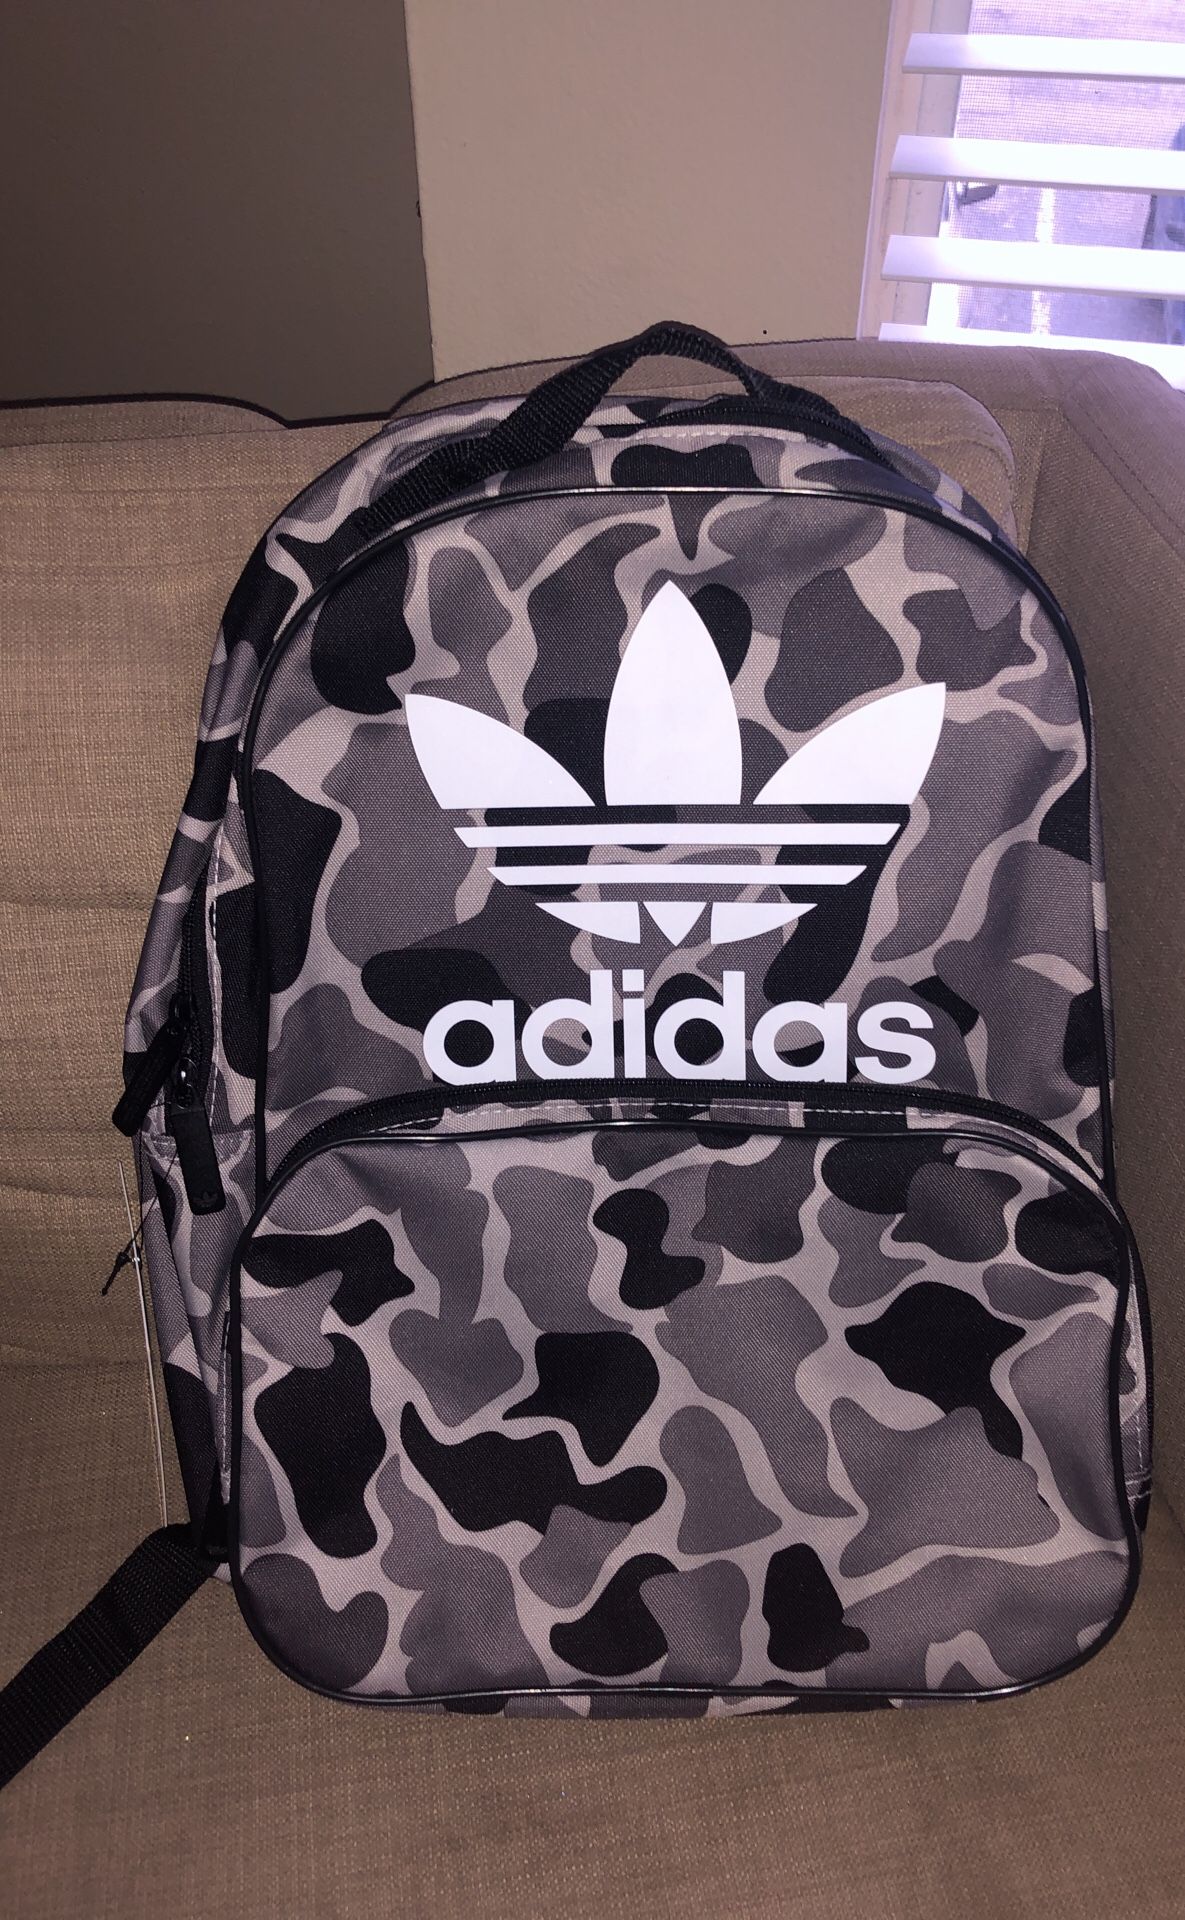 new adidas never used backpack